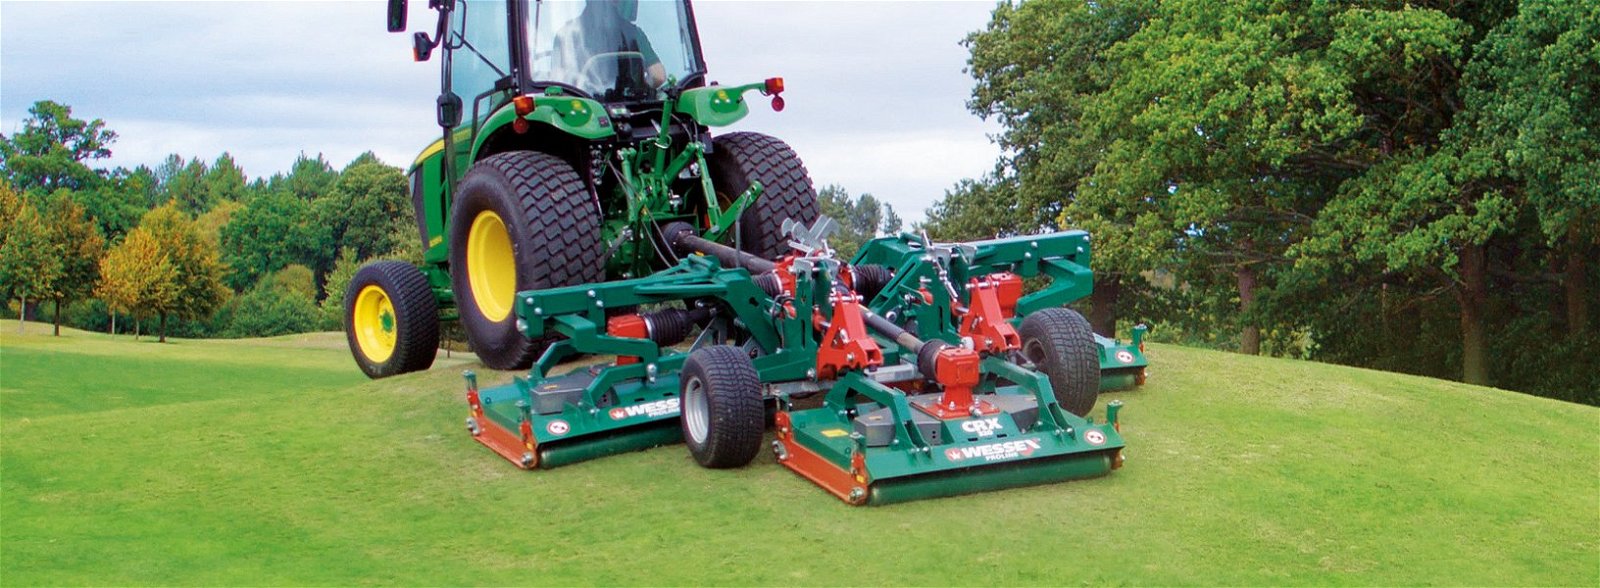 Crx 320 new 2020 1 - professional groundcare & agricultural equipment